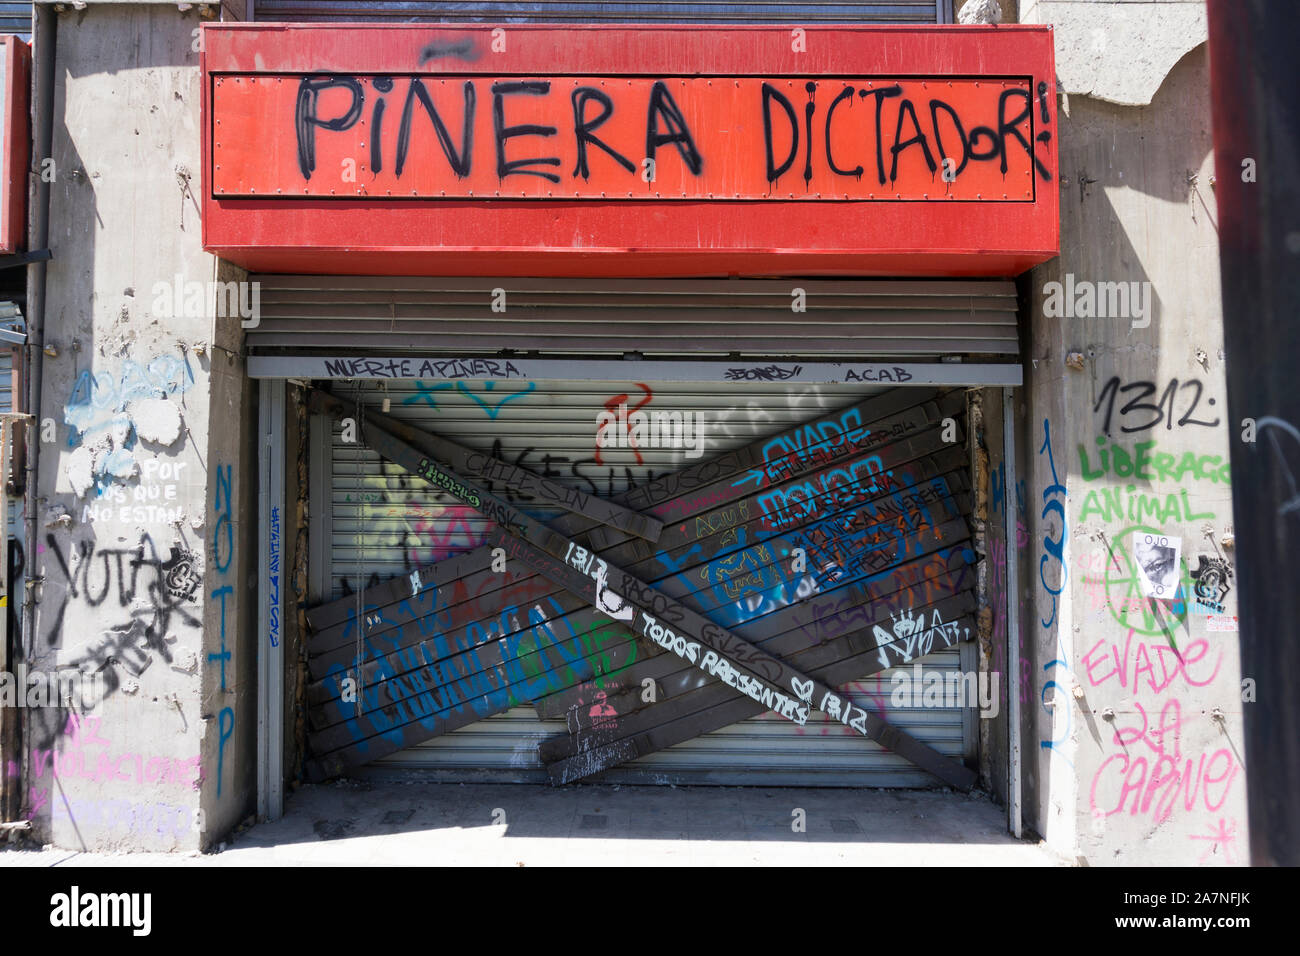 Damaged shop access in Santiago de Chile after the demostration, with grafitti and welded steel bars on the shutters to prevent looting Stock Photo